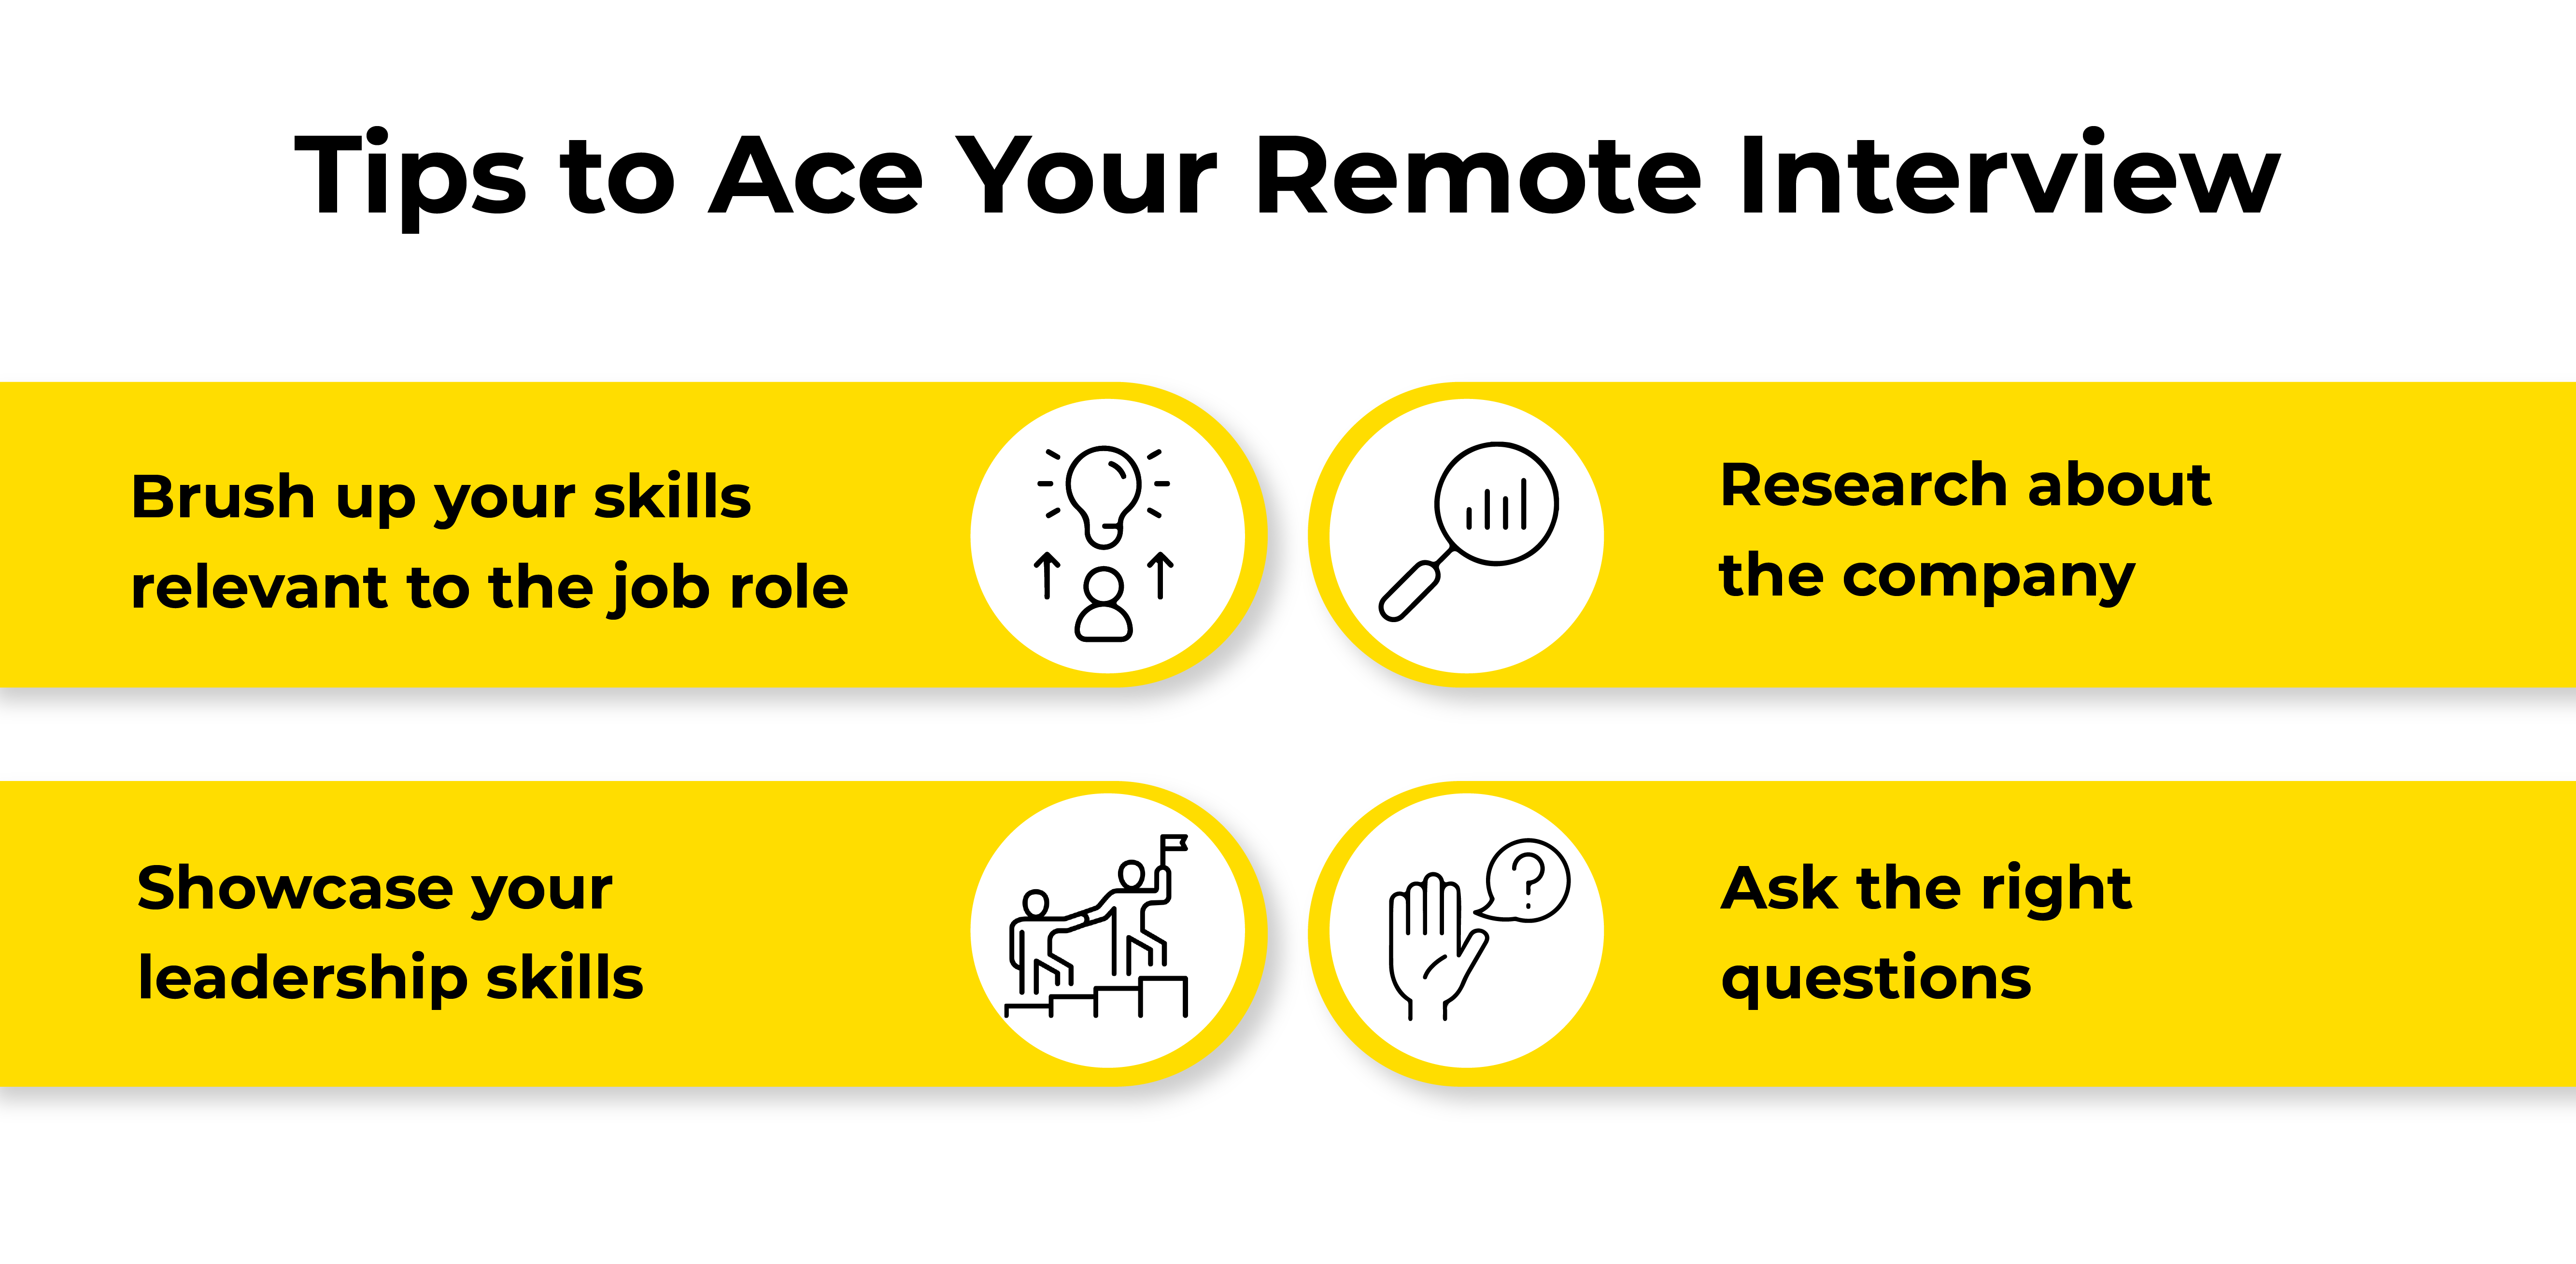 Tips to ace your remote interview